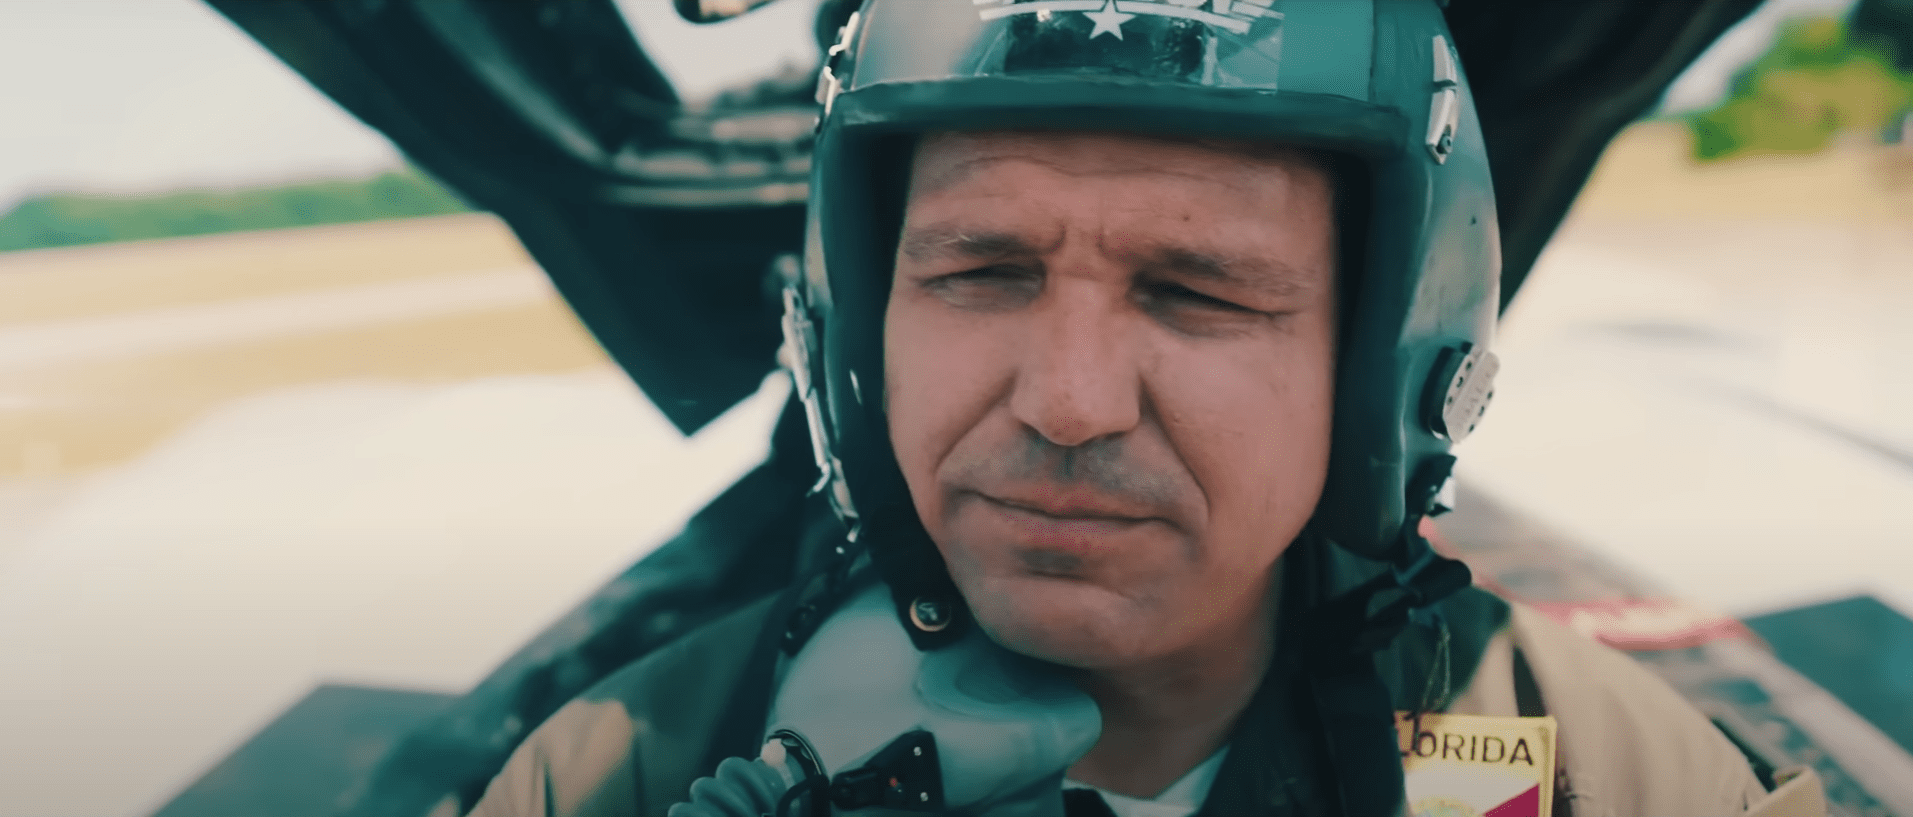 Gov. Ron DeSantis, shown posing as a fighter pilot in a campaign ad, wants his real-life jet travel shielded from public view.